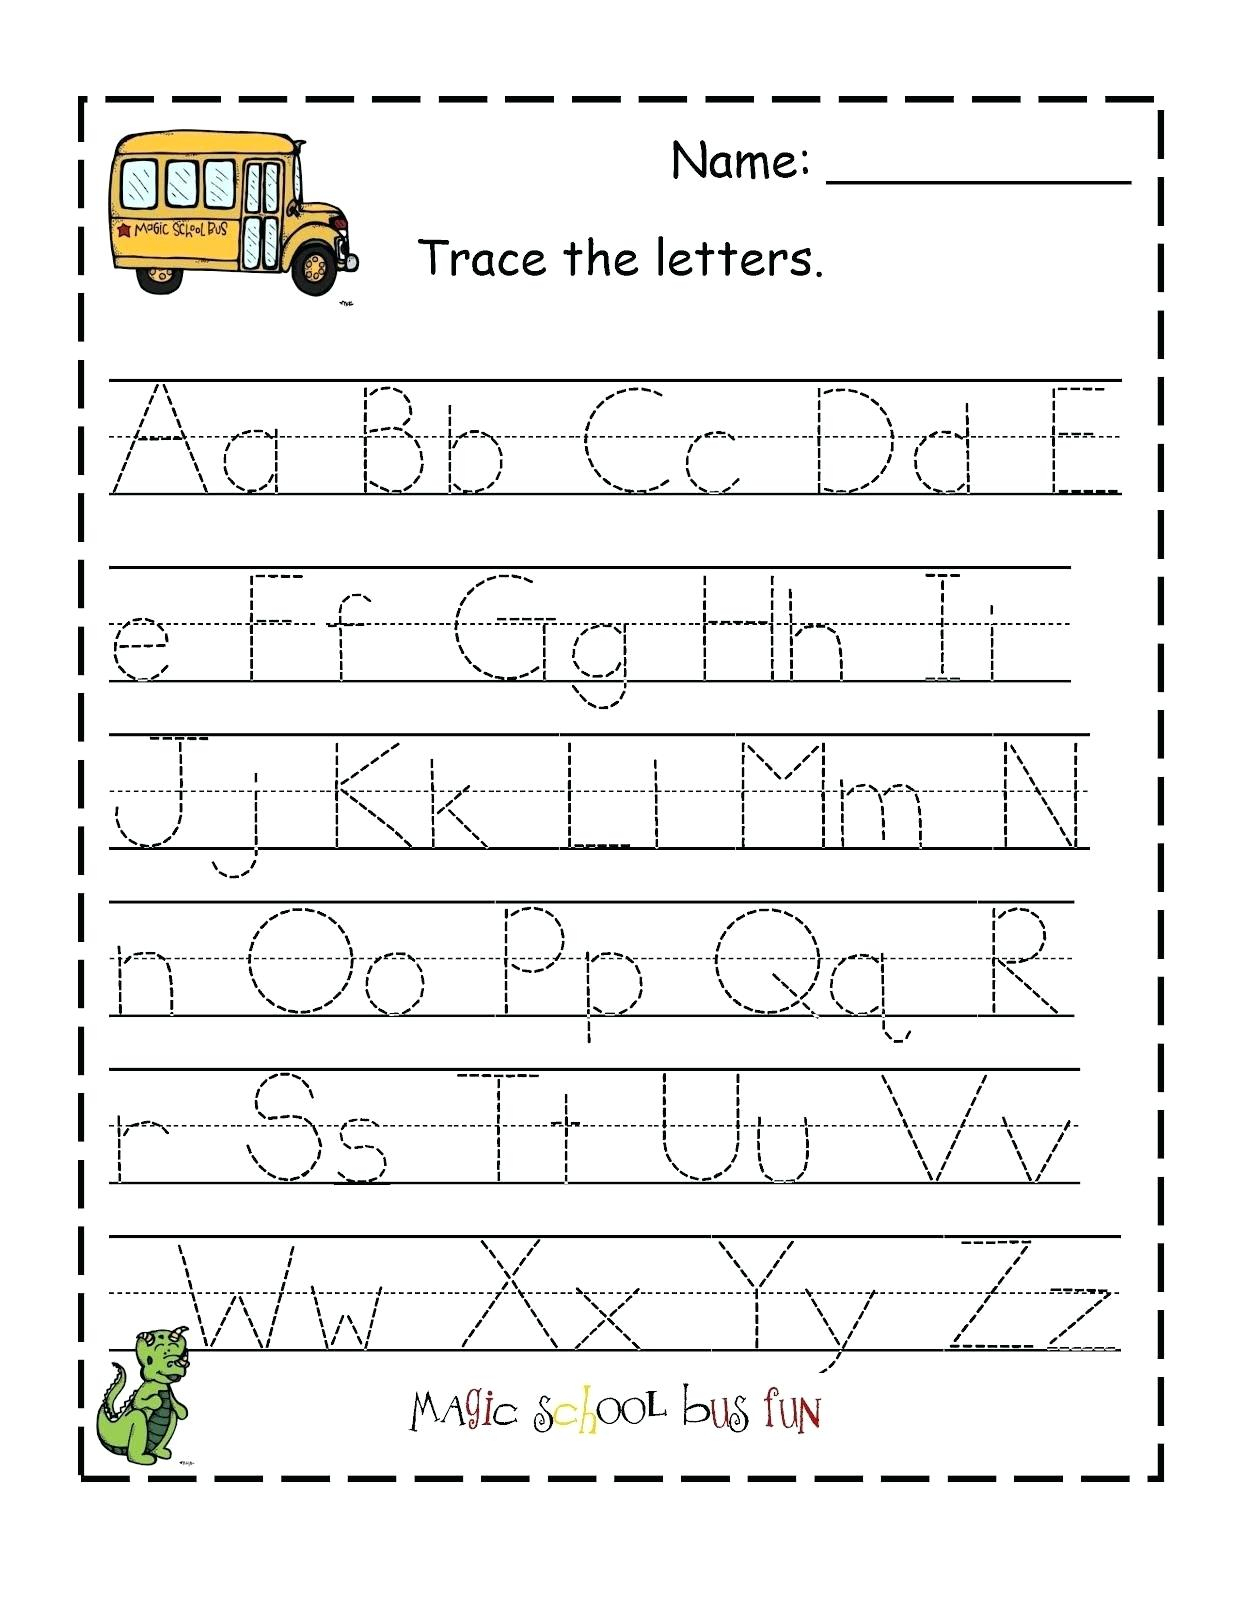 Abc Traceable Tracing Alphabet Kiddo Shelter Abc Traceable Sheets | Traceable Abc Printable Worksheets